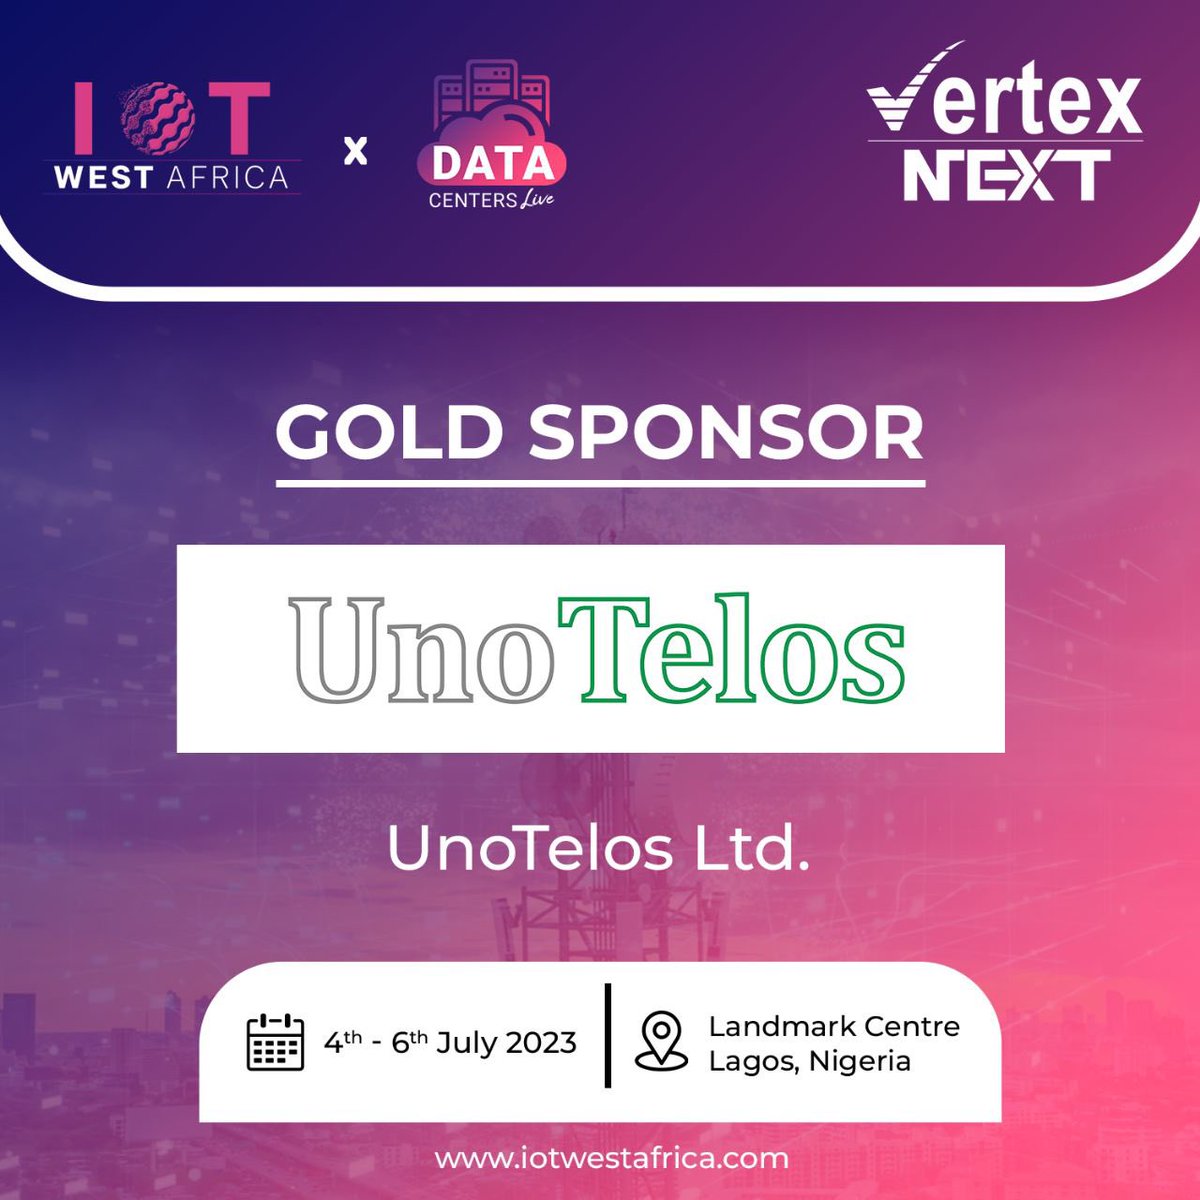 IOT West Africa X Data Centers Live Conference & Exhibition welcomes UnoTelos as its Gold Sponsor. 

Register Now for Free at: eventsrail.com/iotwa2023

Explore more at: iotwestafrica.com

#sponsor #goldsponsor #iot #westafrica #telecommunications #oilgas #hospitality